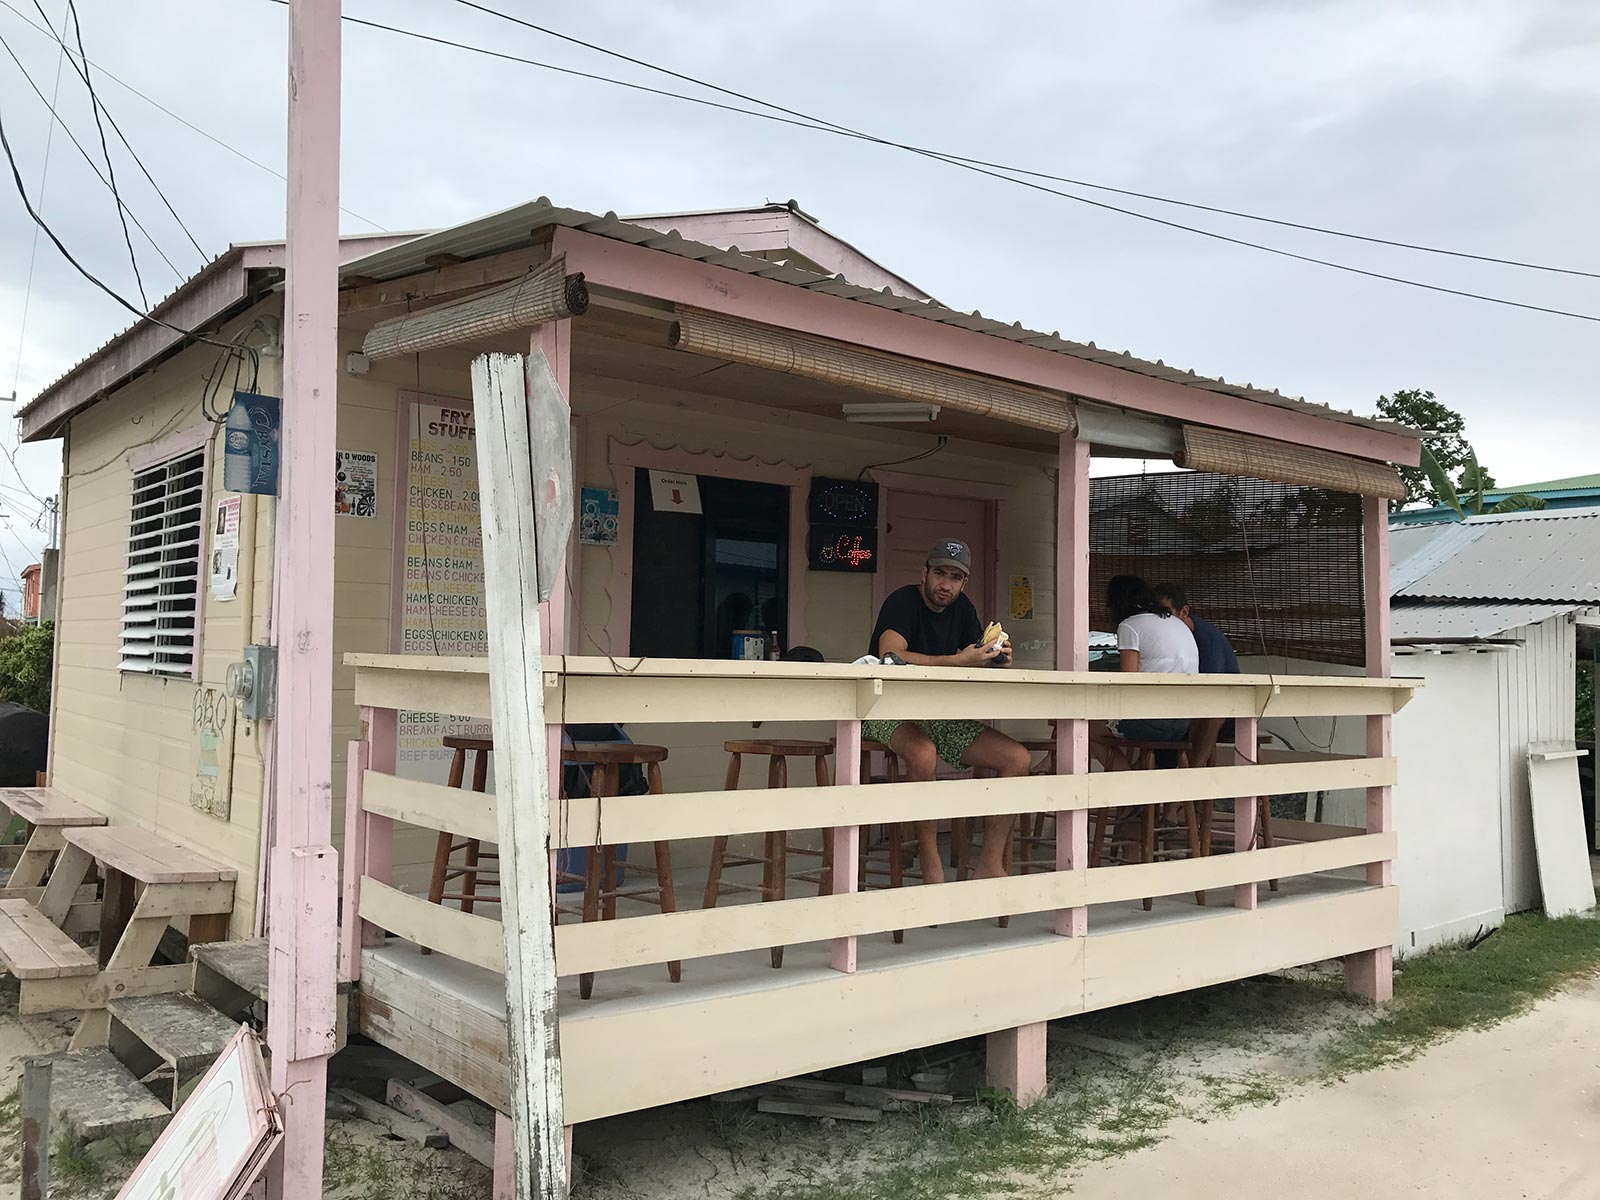 Guy eating at Fry Jacks in Belize, Mexico. Chichén Itzá and the Yucatán coast